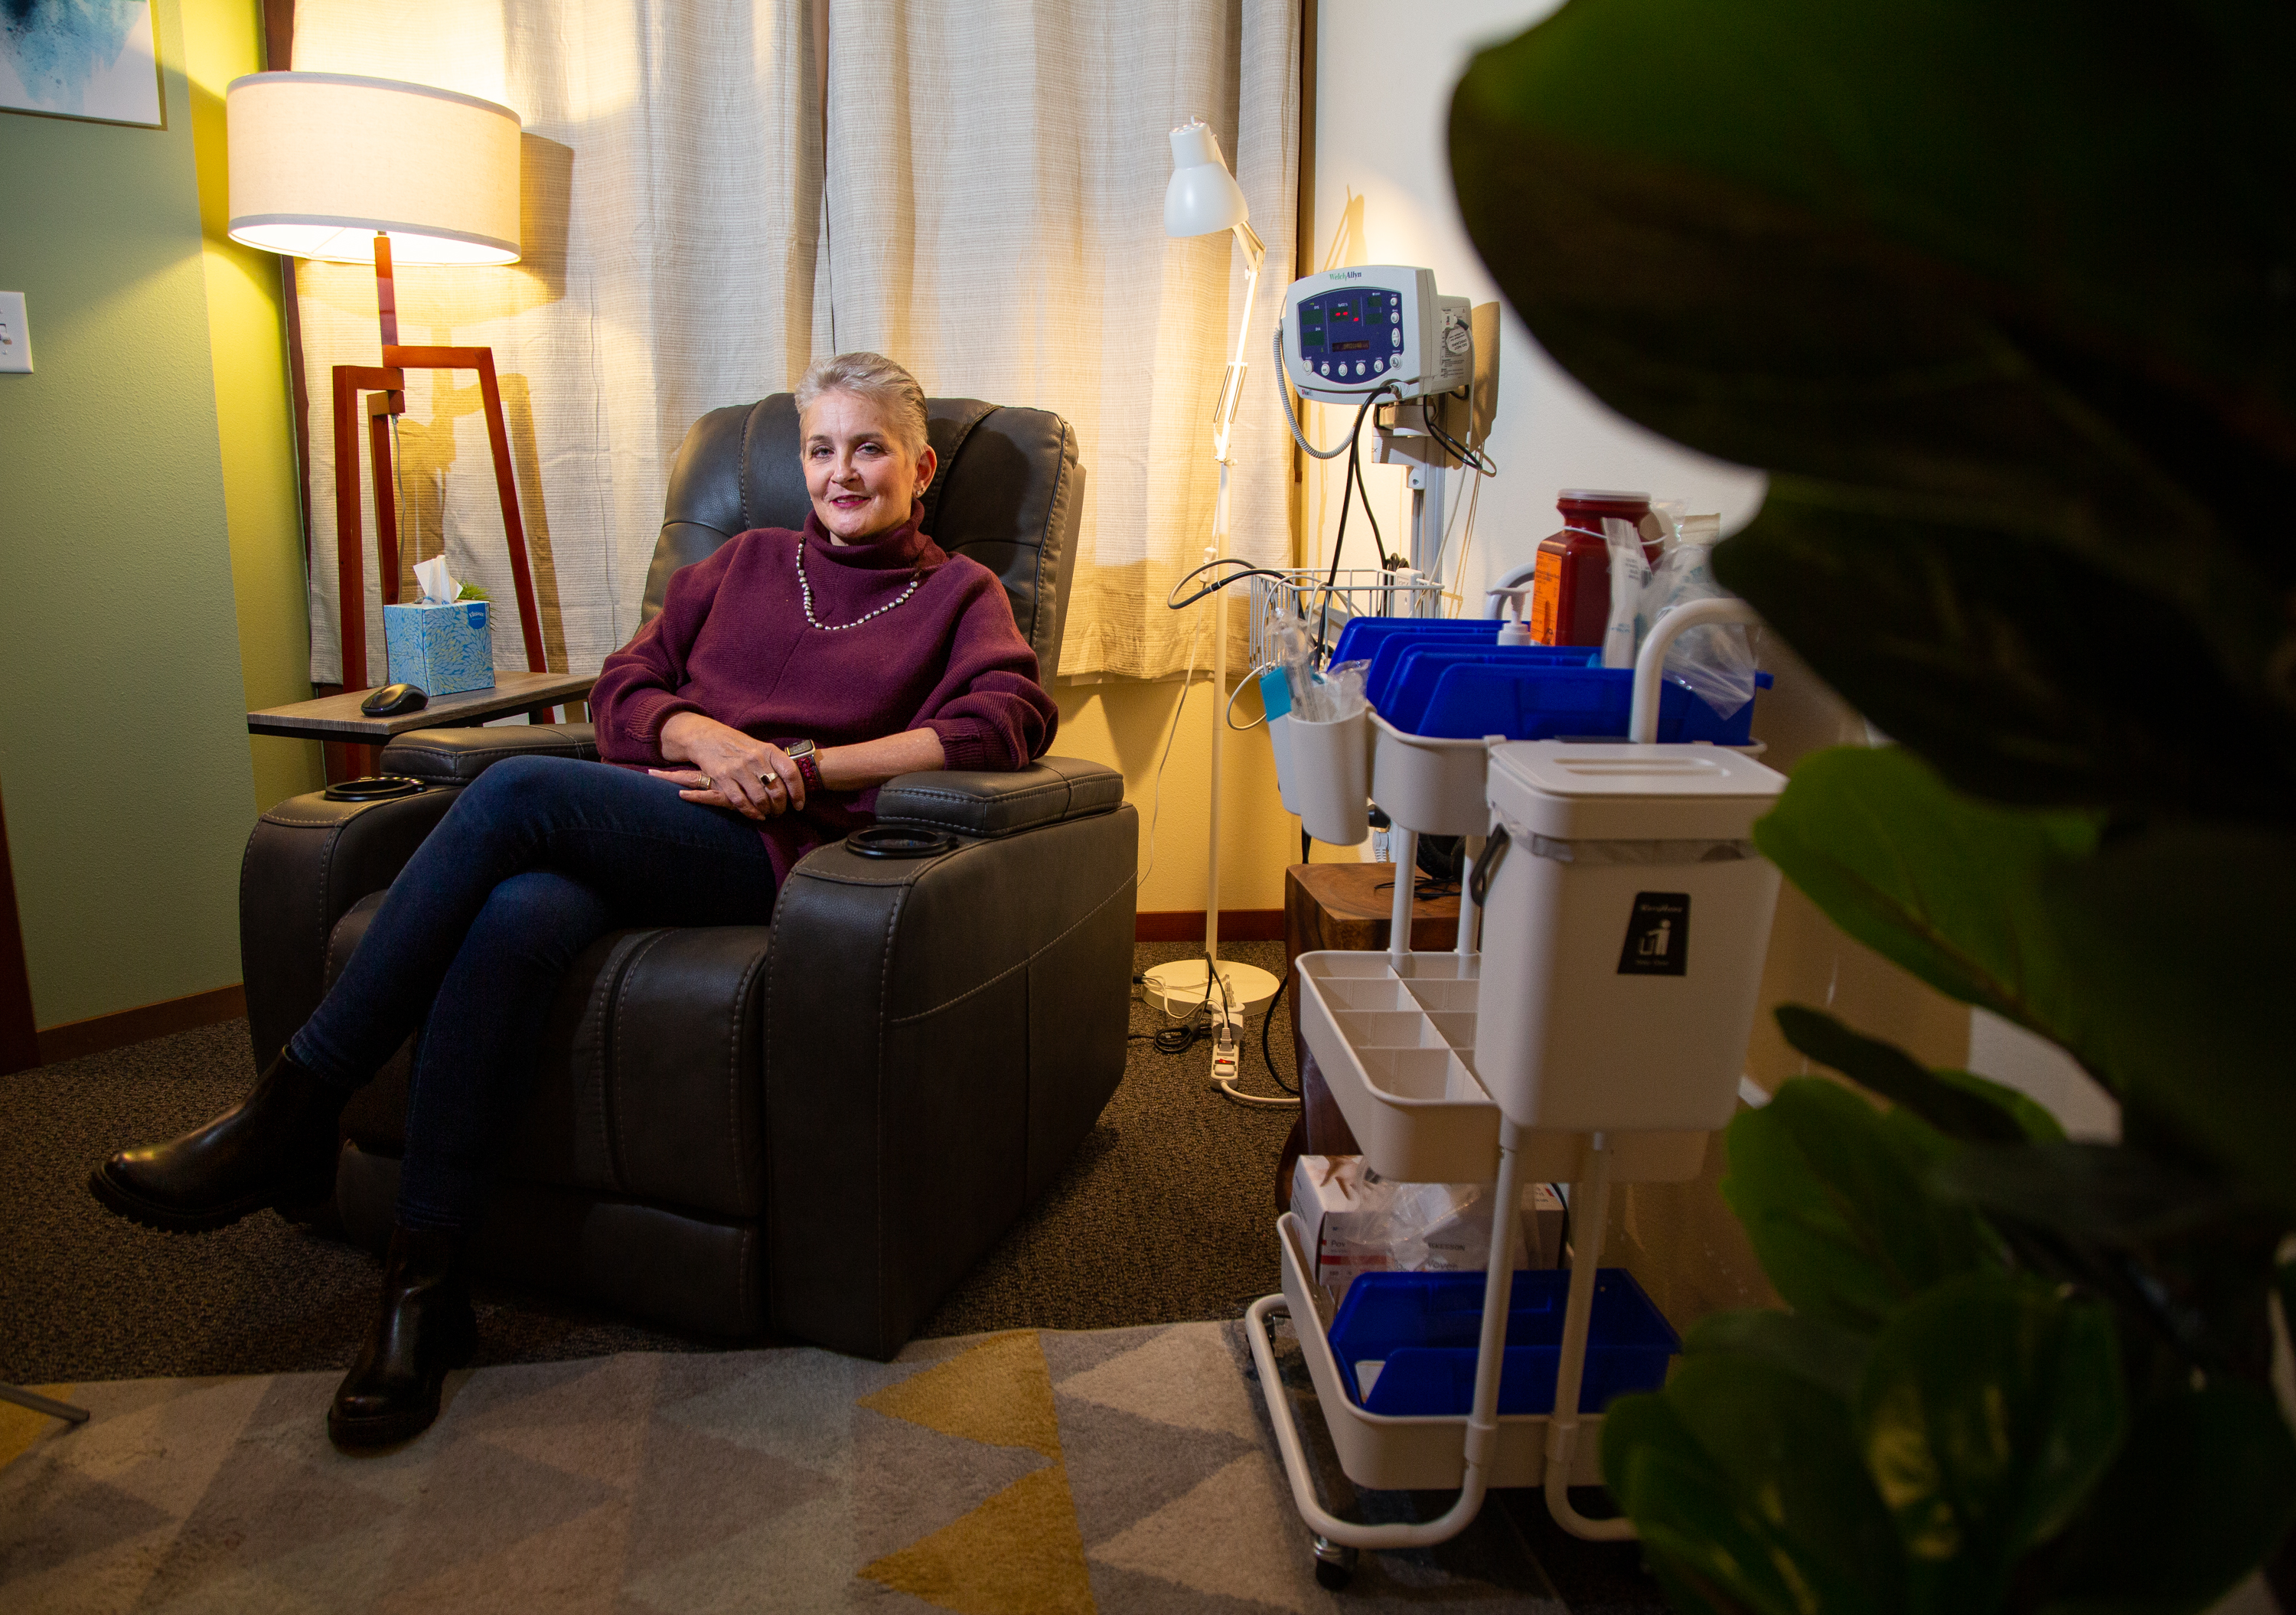 Dana Berger sits in a recliner next to carts of medical equipment at King Health on Nov. 21. Patients undergo the ketamine treatment in the small, cozy room. Karen King – owner and therapist – designed the space to be warm, comforting and safe.